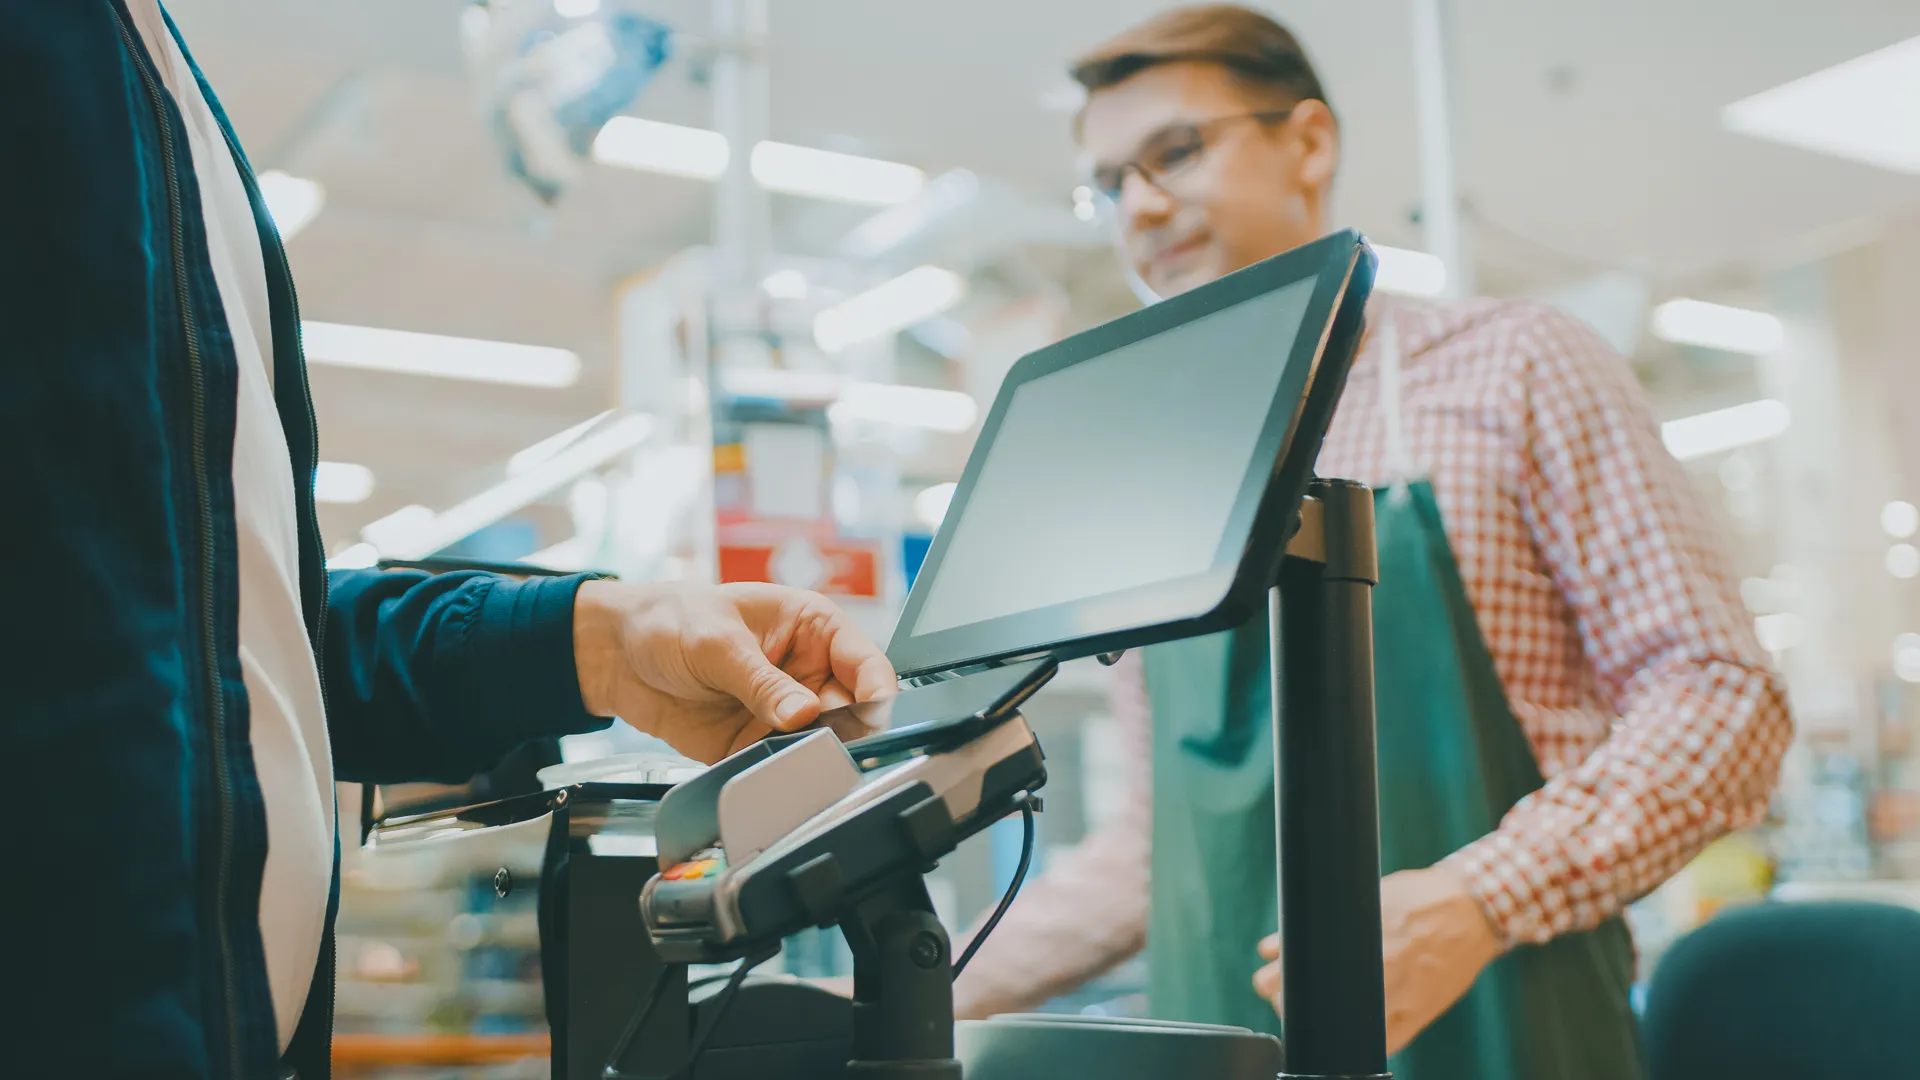 At the Supermarket: Checkout Counter Customer Pays with Smartphone for His Food Items.